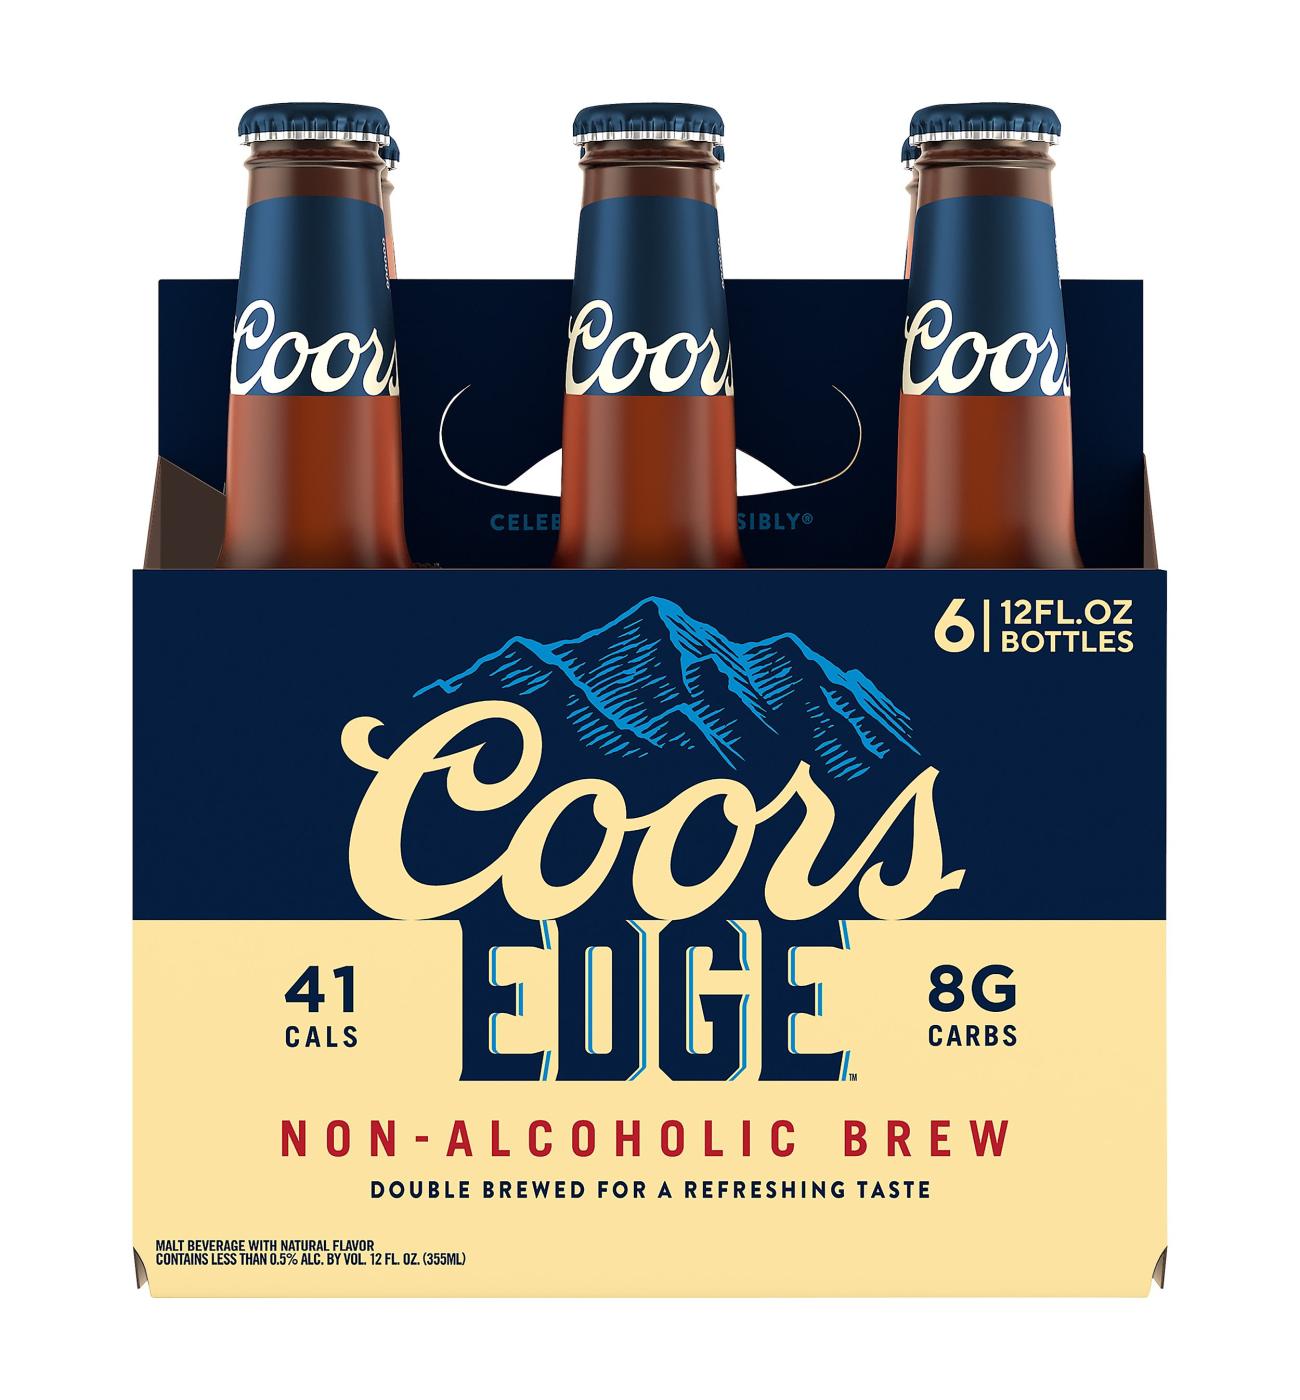 Coors Non-Alcoholic Brew 6 pk Bottles; image 1 of 2